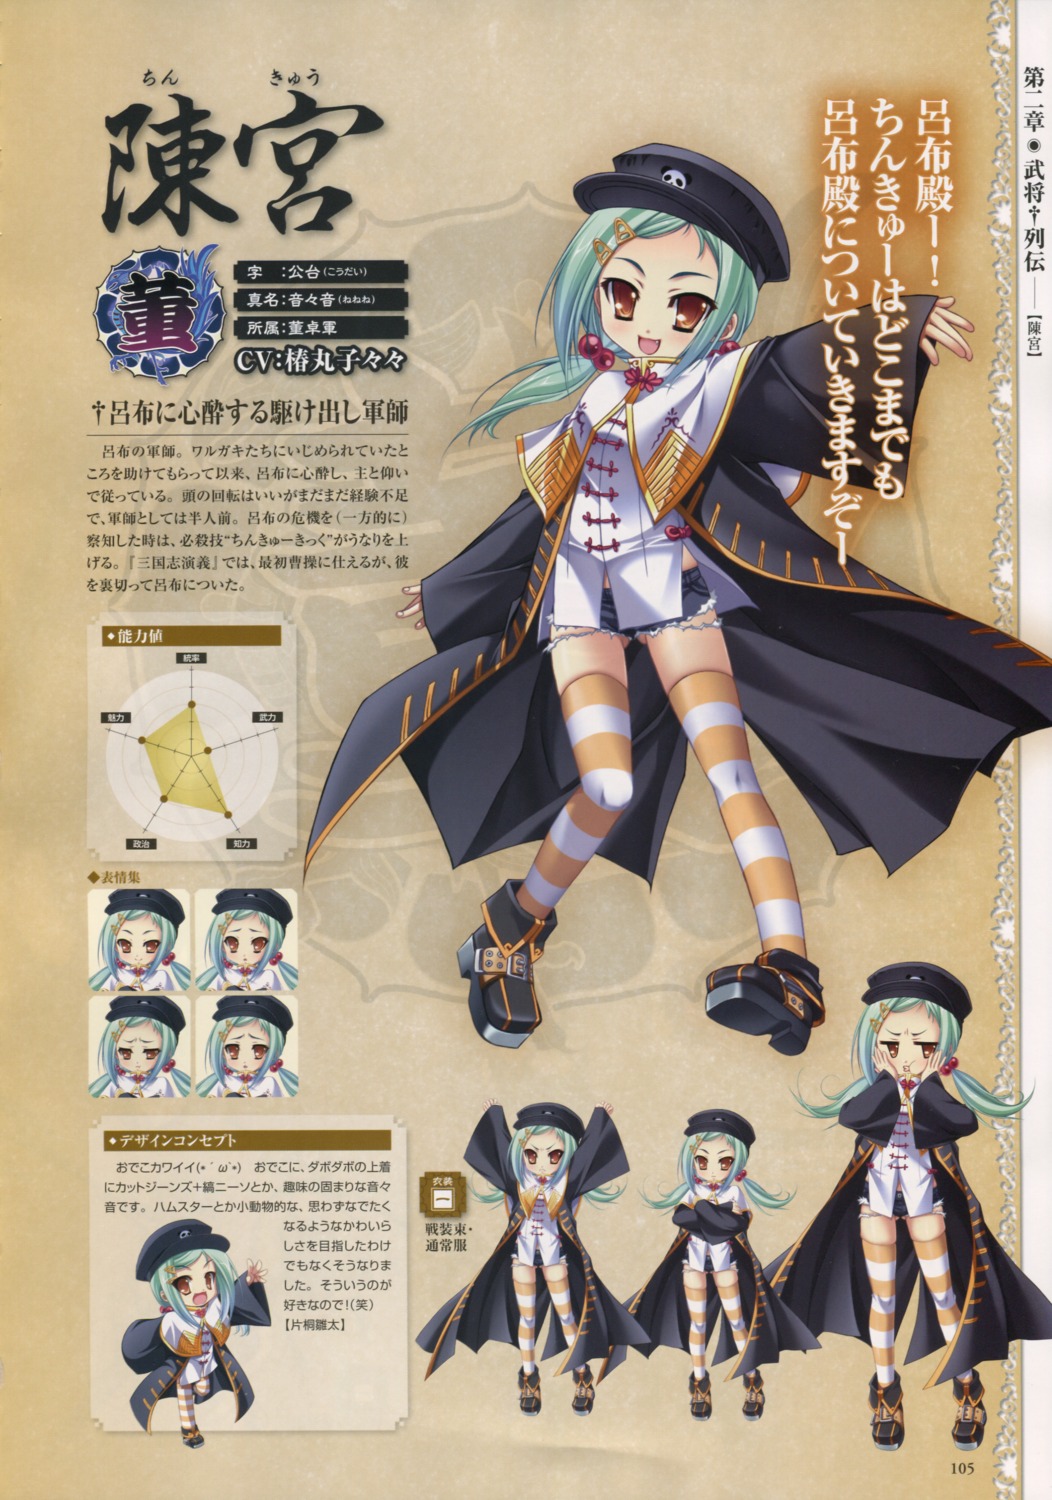 asian_clothes baseson character_design chibi chinkyuu expression koihime_musou profile_page thighhighs